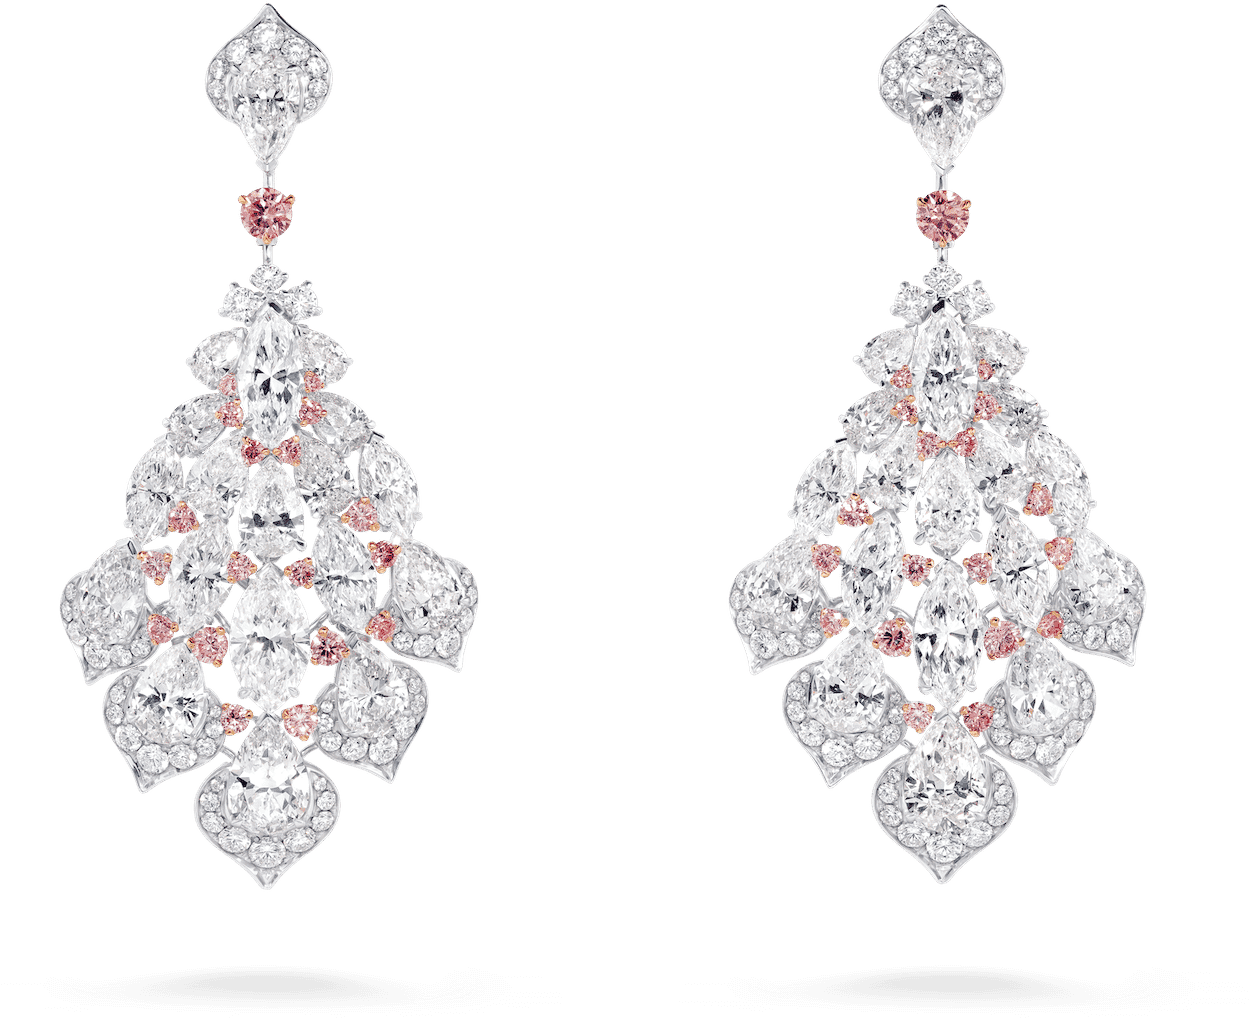 White And Pink Diamond Feather Earrings 09 01 1381 - David Morris Diamond Earrings, Hd Png Download